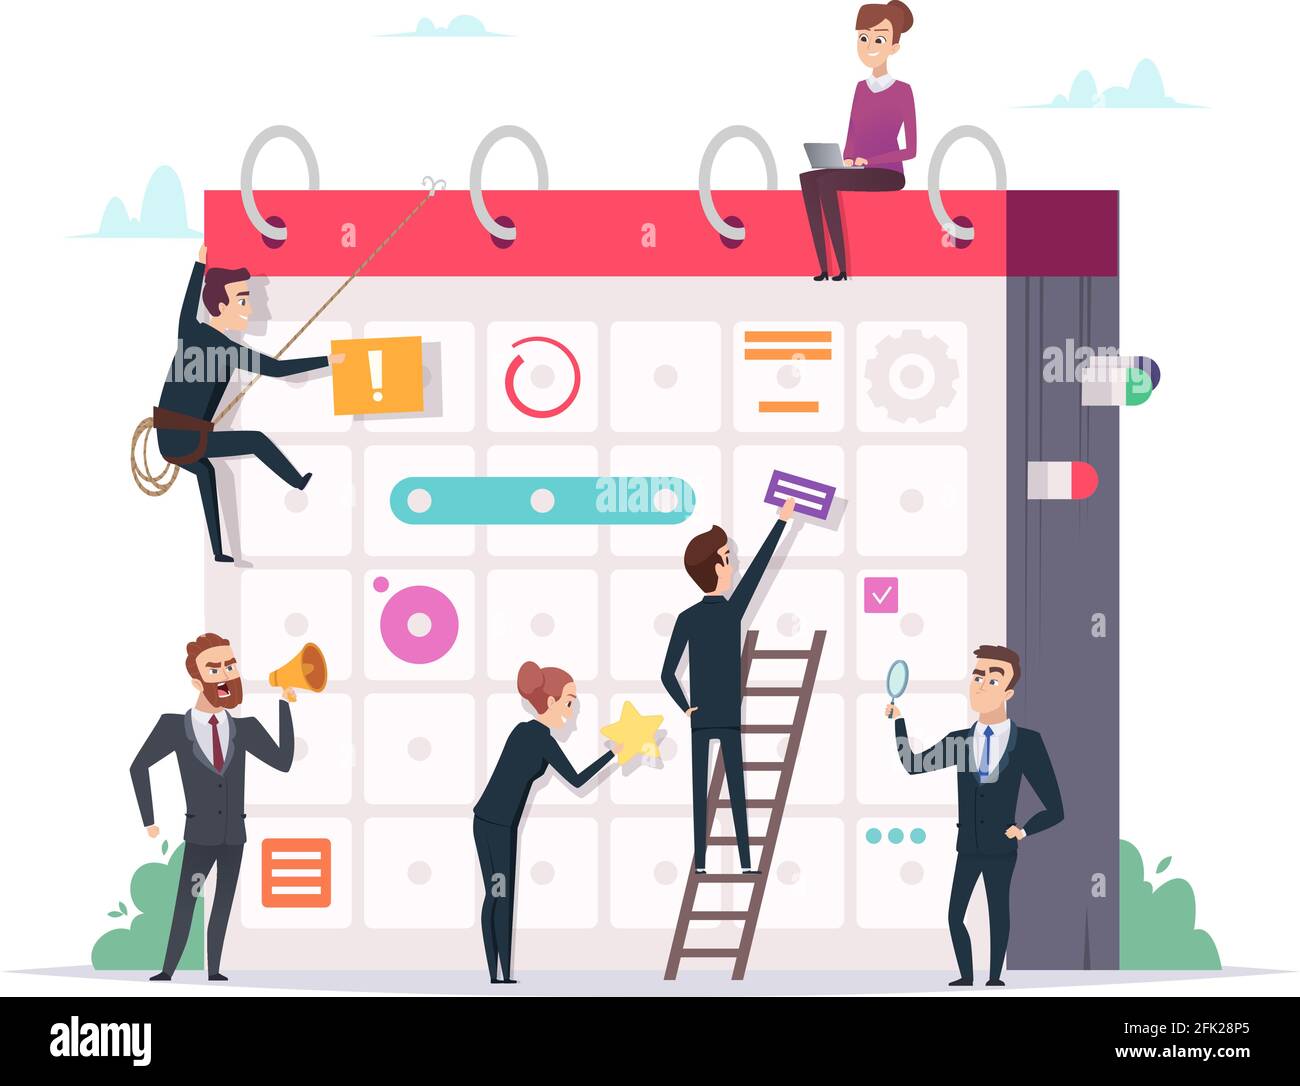 Business schedule concept. Characters managers making daily plans event organization professional management strategy tools planning Stock Vector